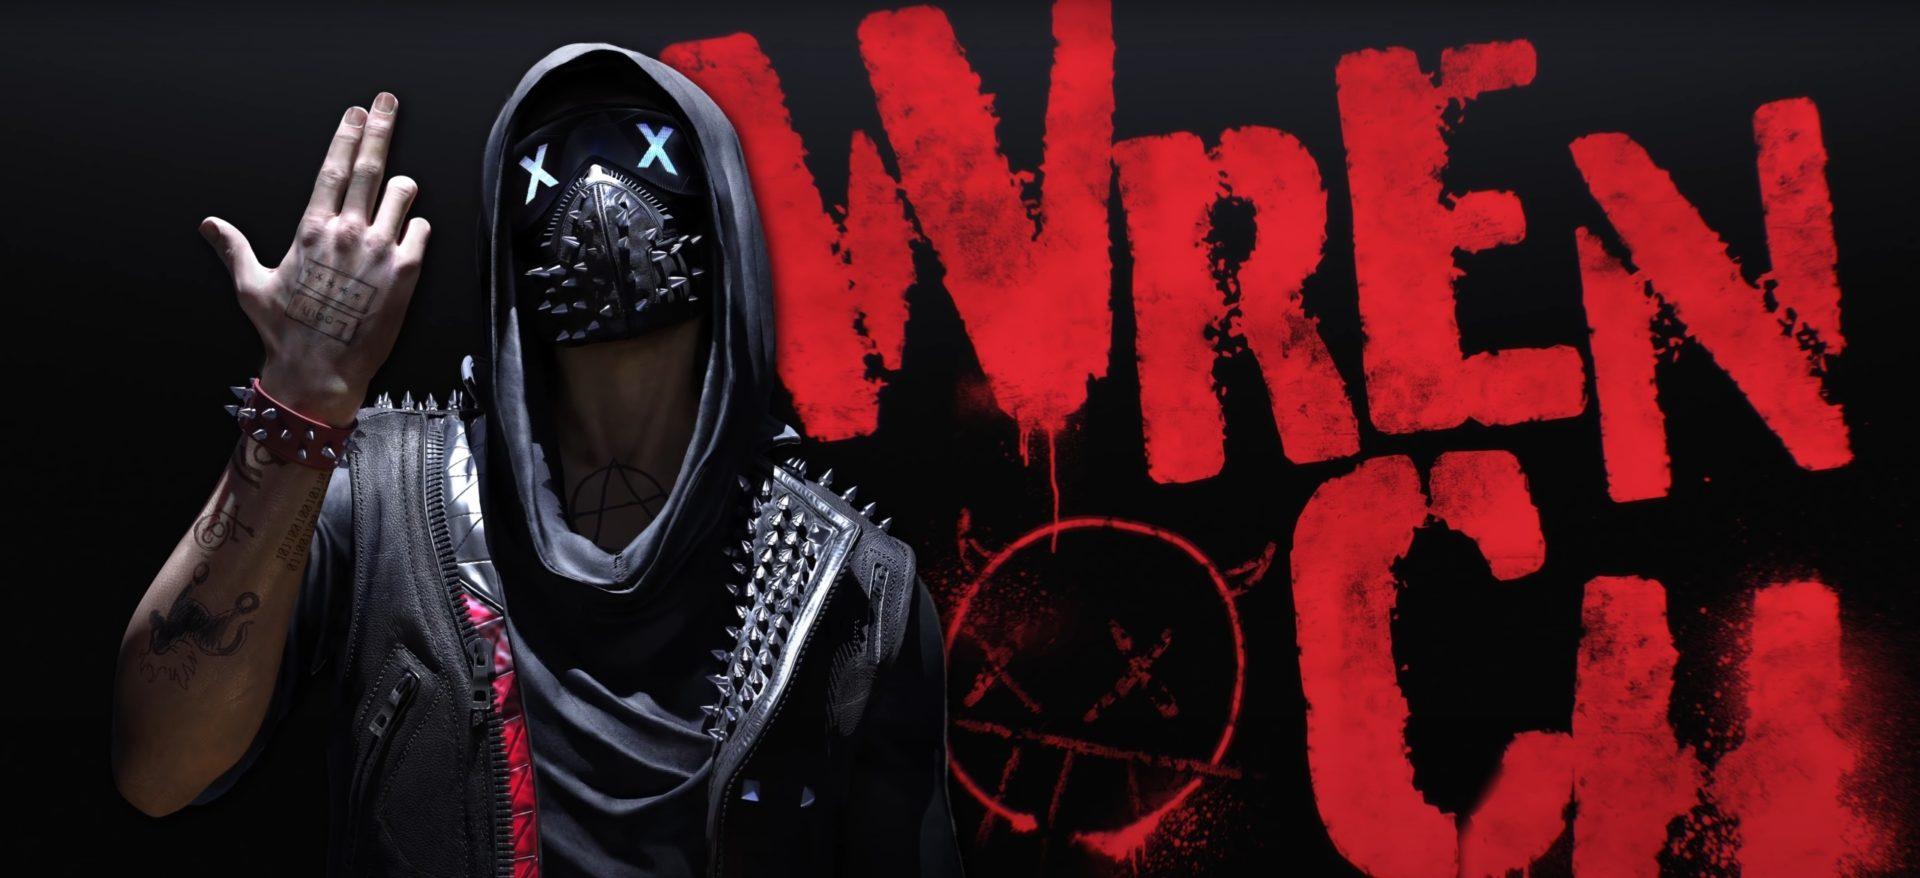 Image of the Watch Dogs character, Wrench, posing alongside his name graffitied on a black background